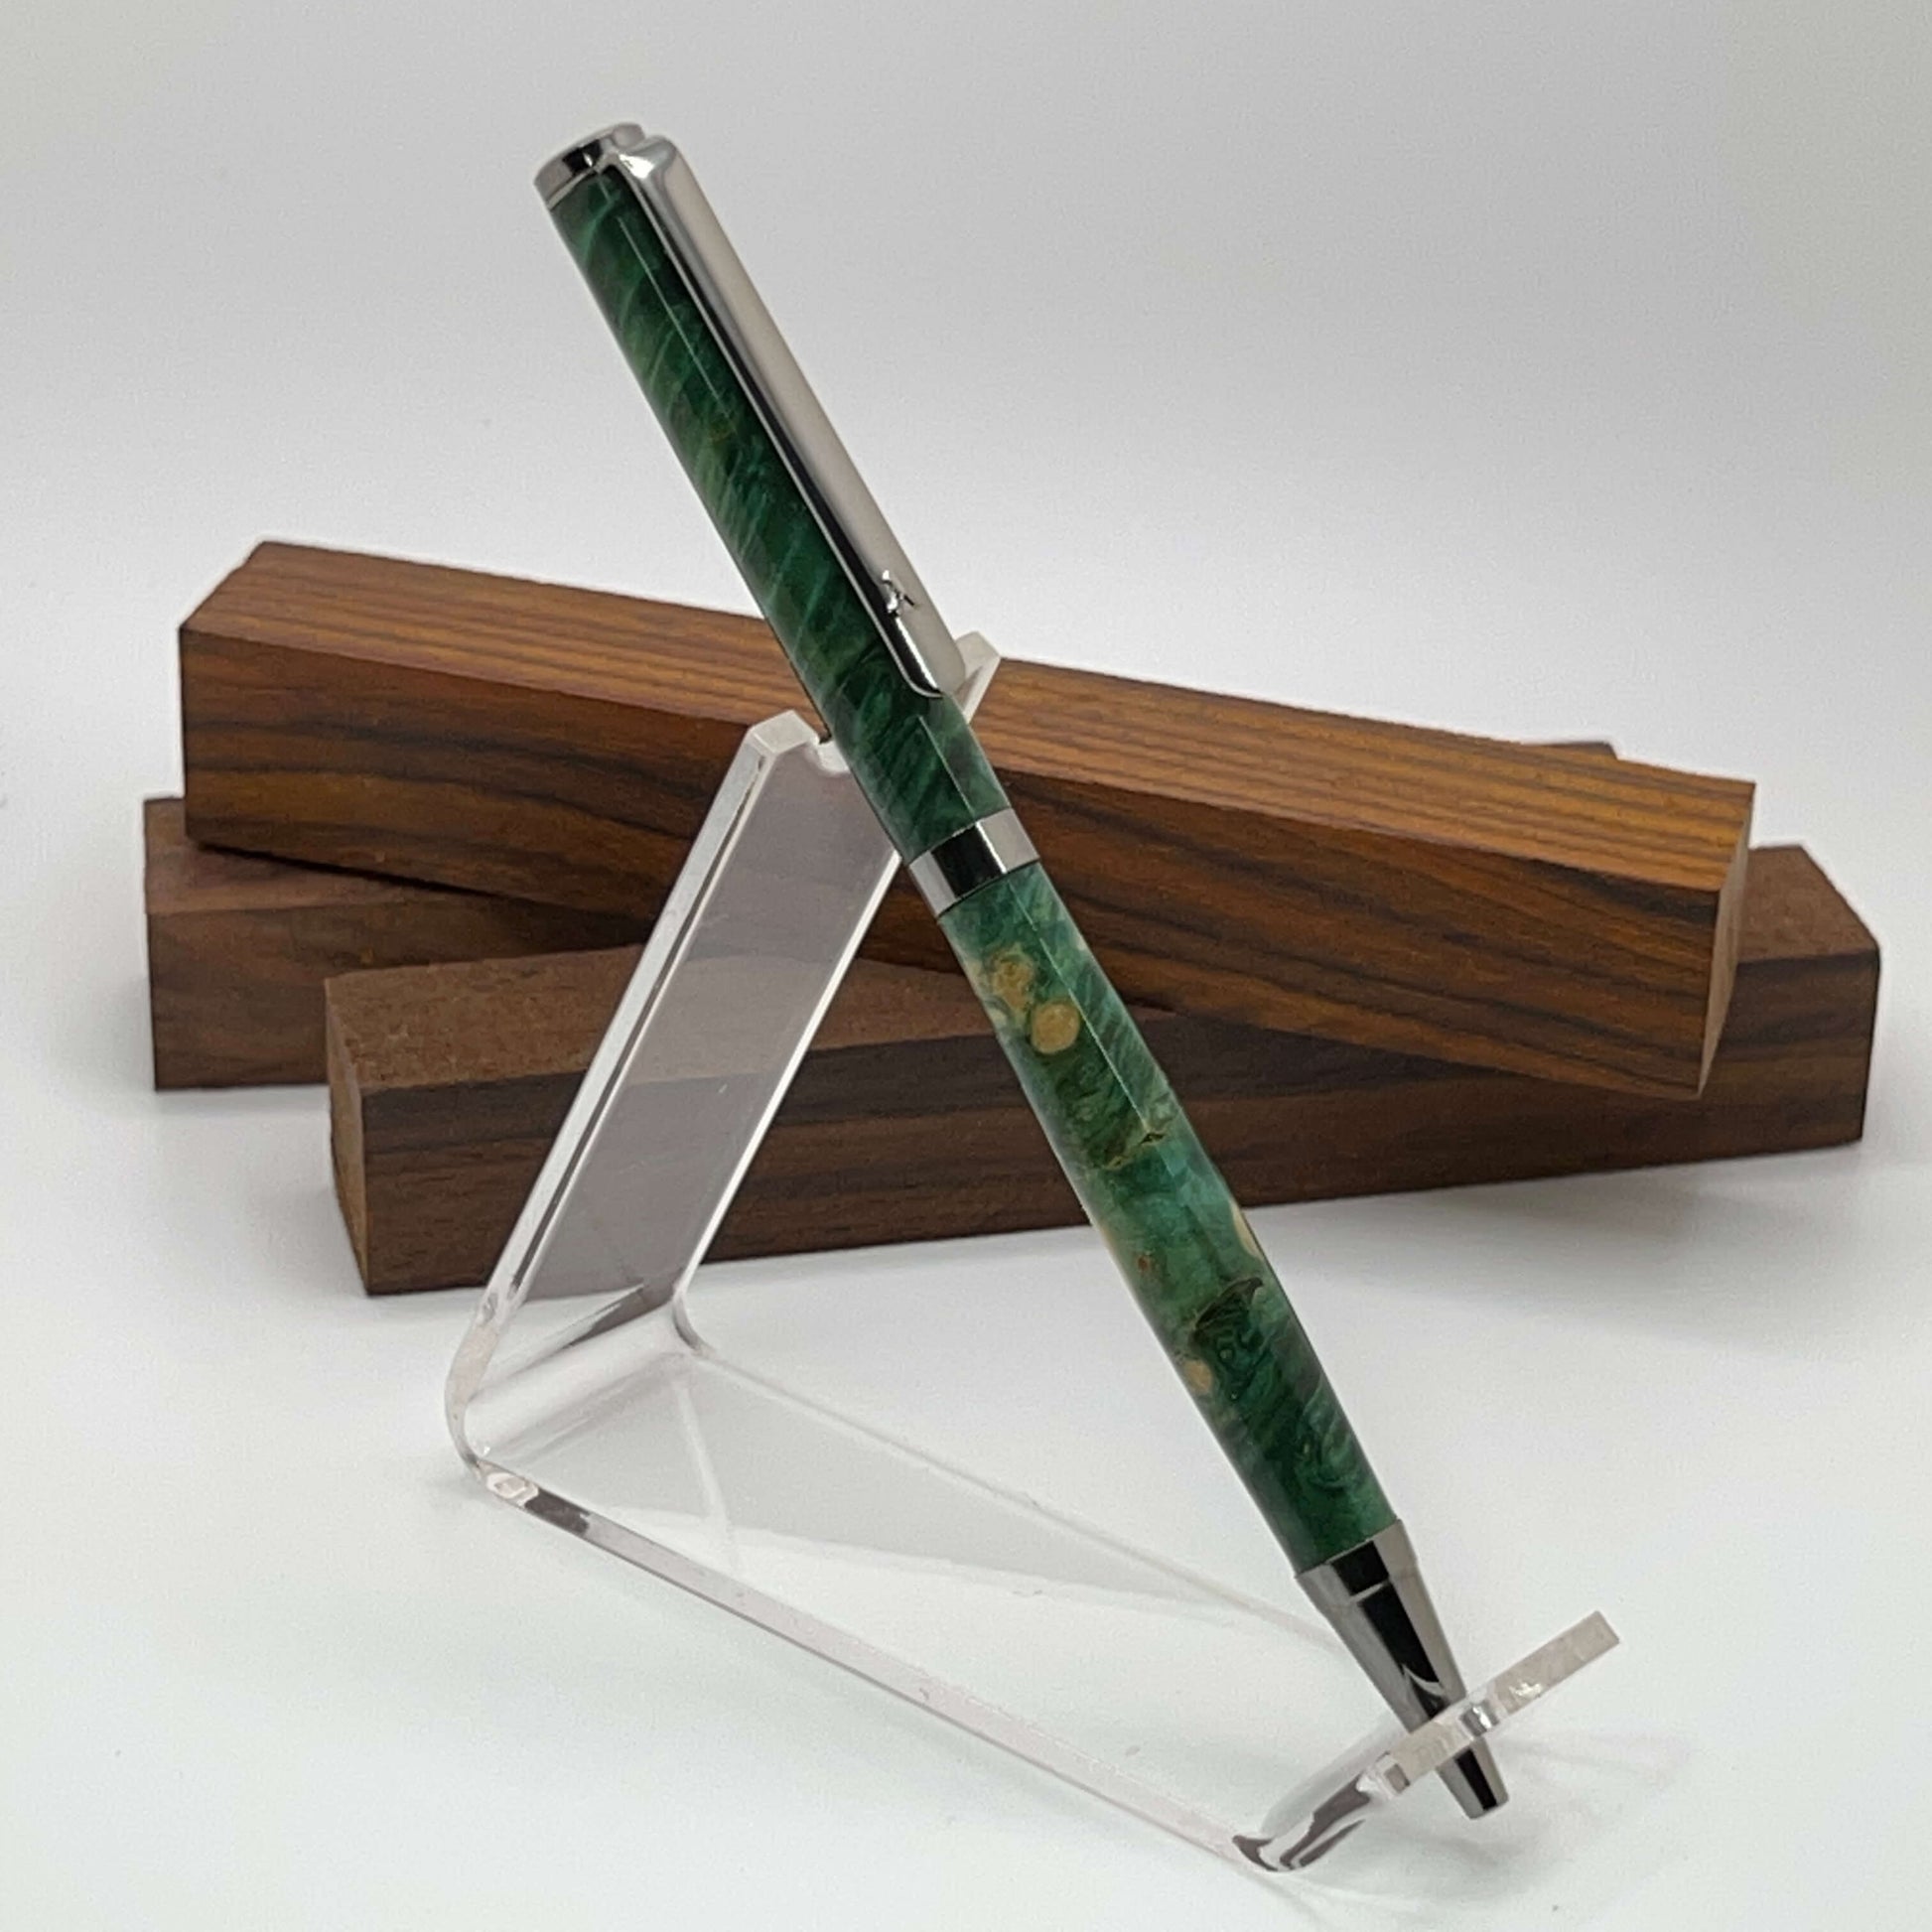 Handcrafted pen with Box Elder Burl wood dyed green and black titanium hardware